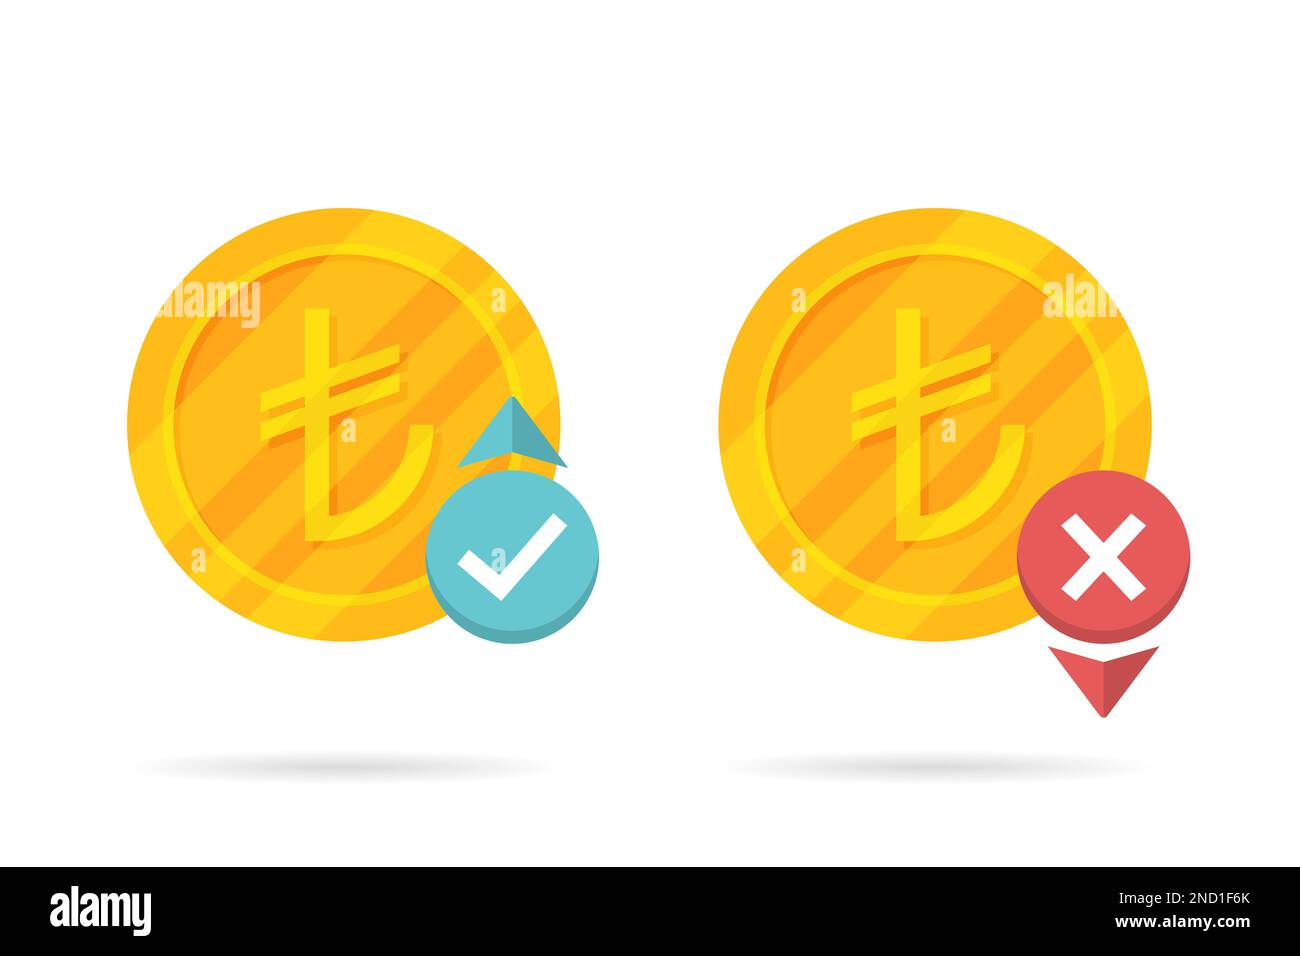 Up and down lira money icon with shadow Stock Vector